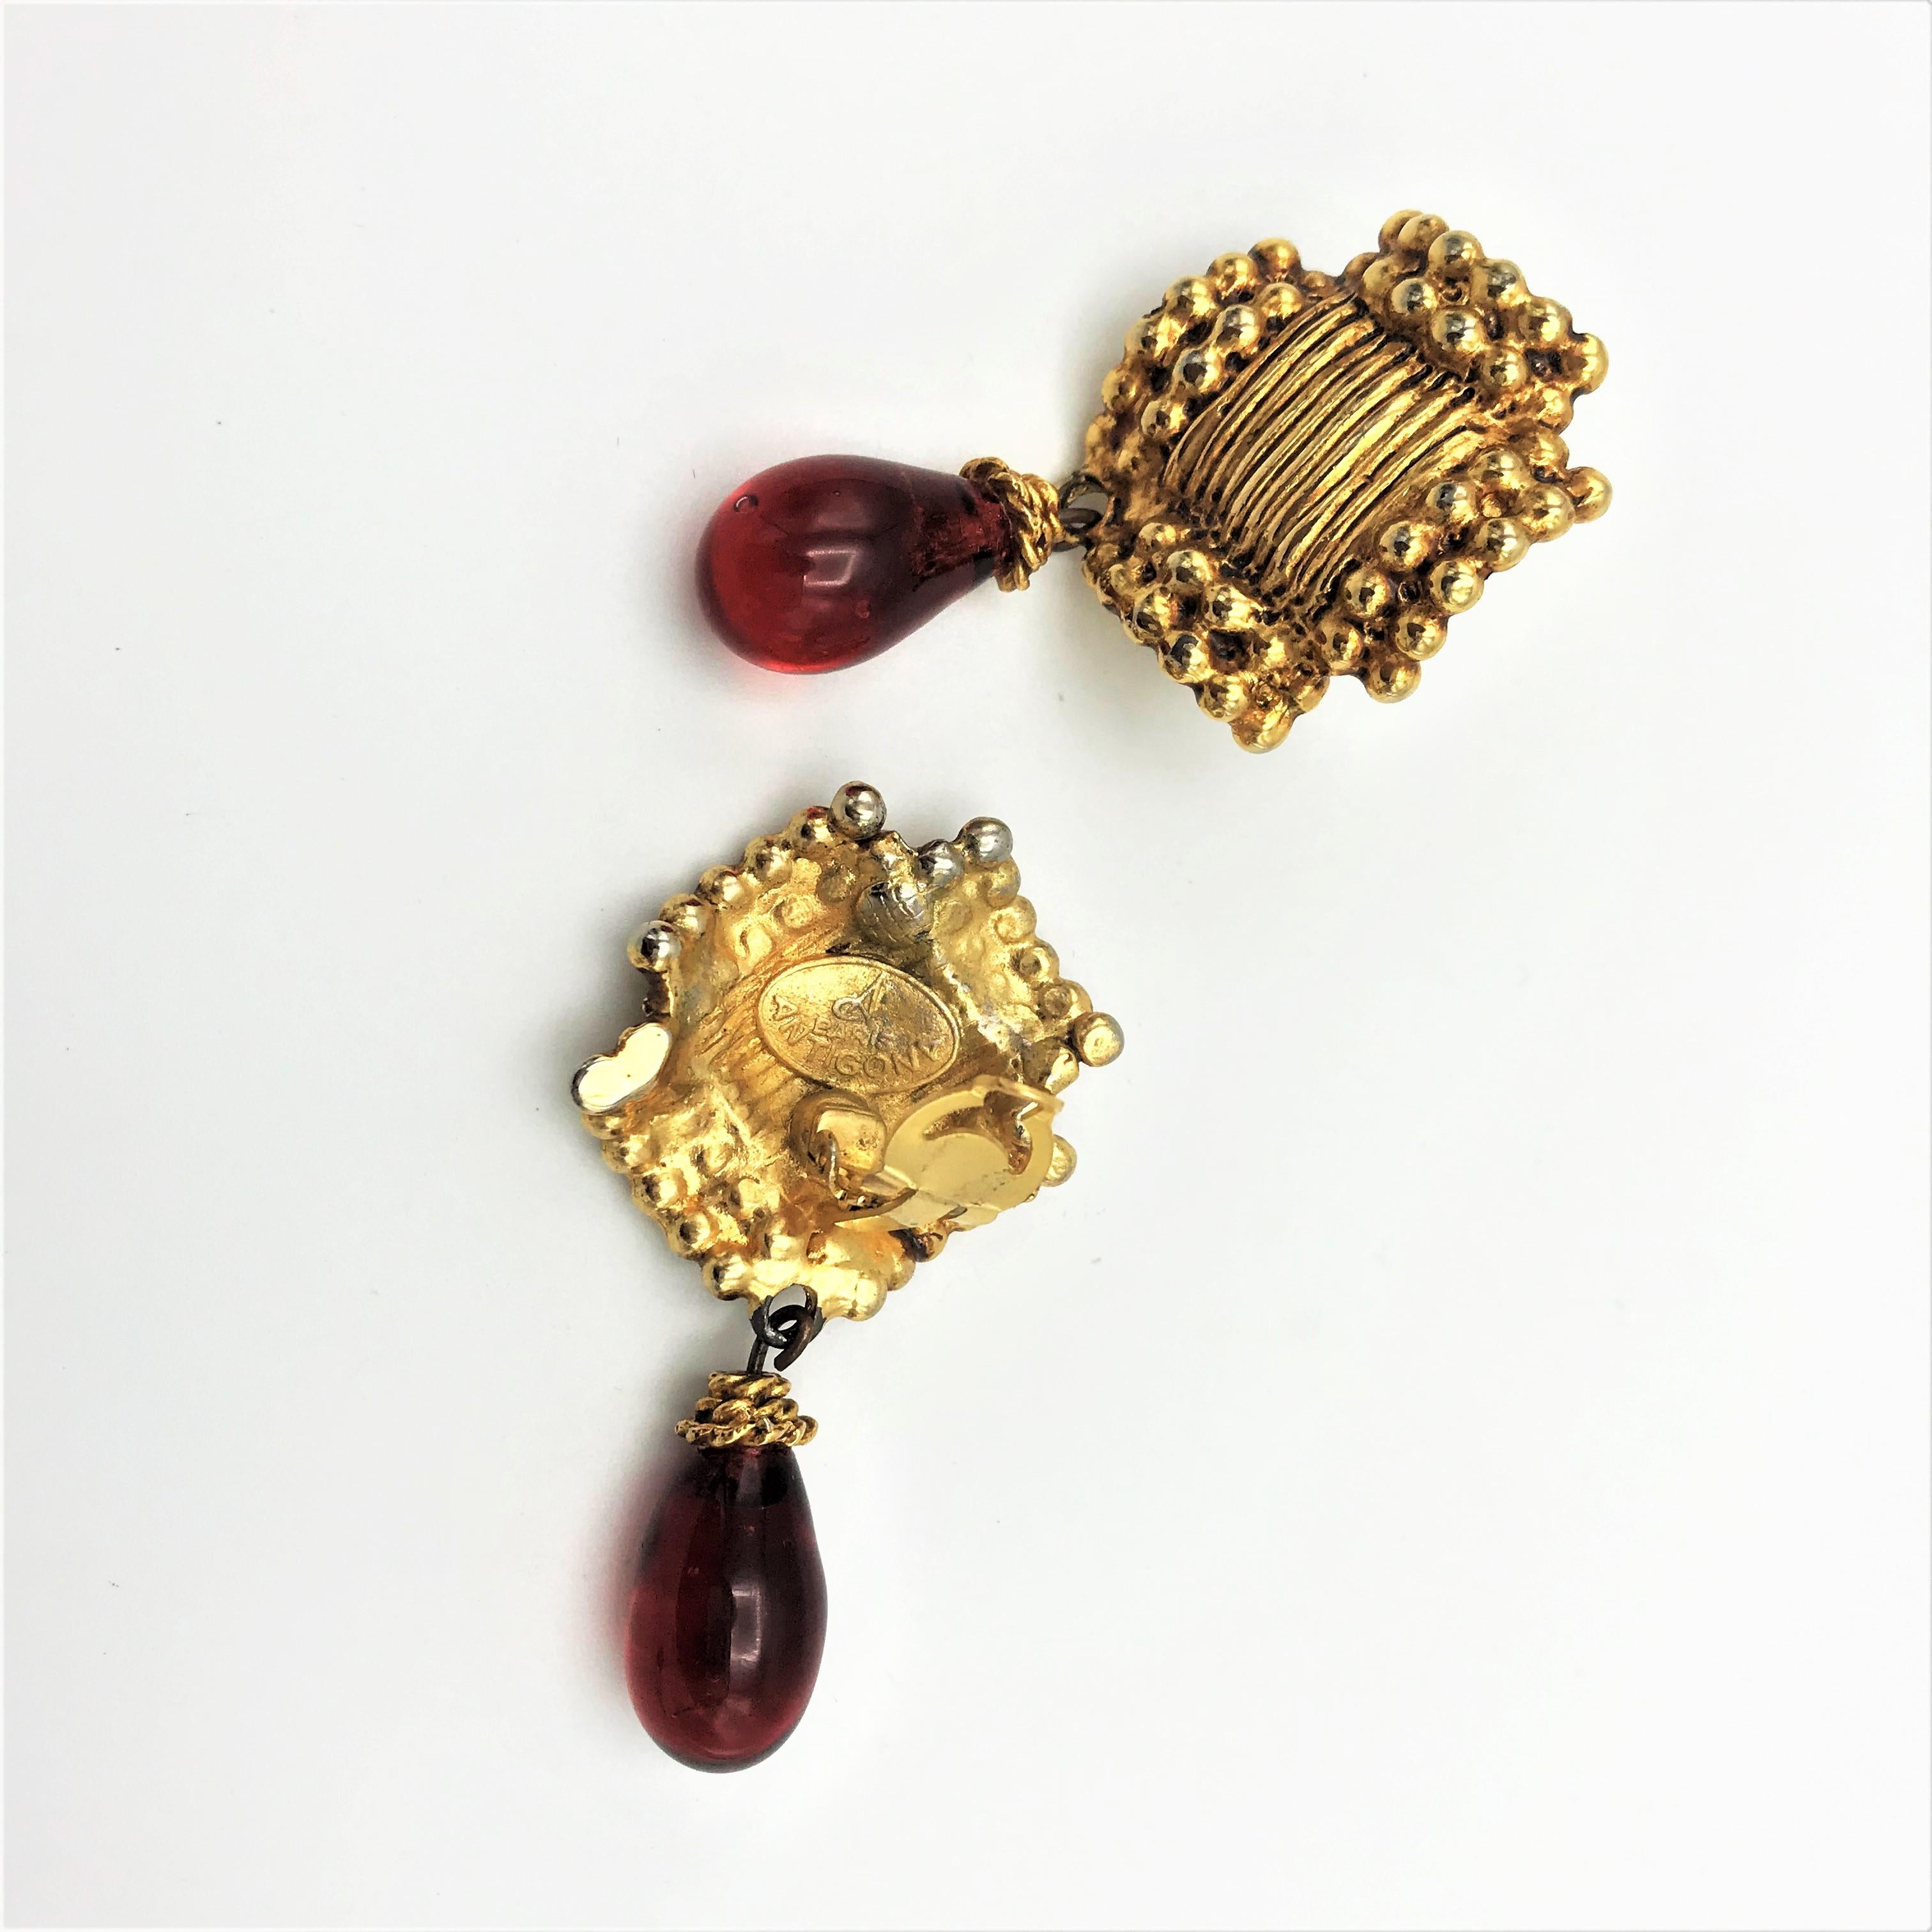  Vintage clip-on earrings from ANTIGONA PARIS 1970s, gold-plated with red drops In Good Condition For Sale In Stuttgart, DE